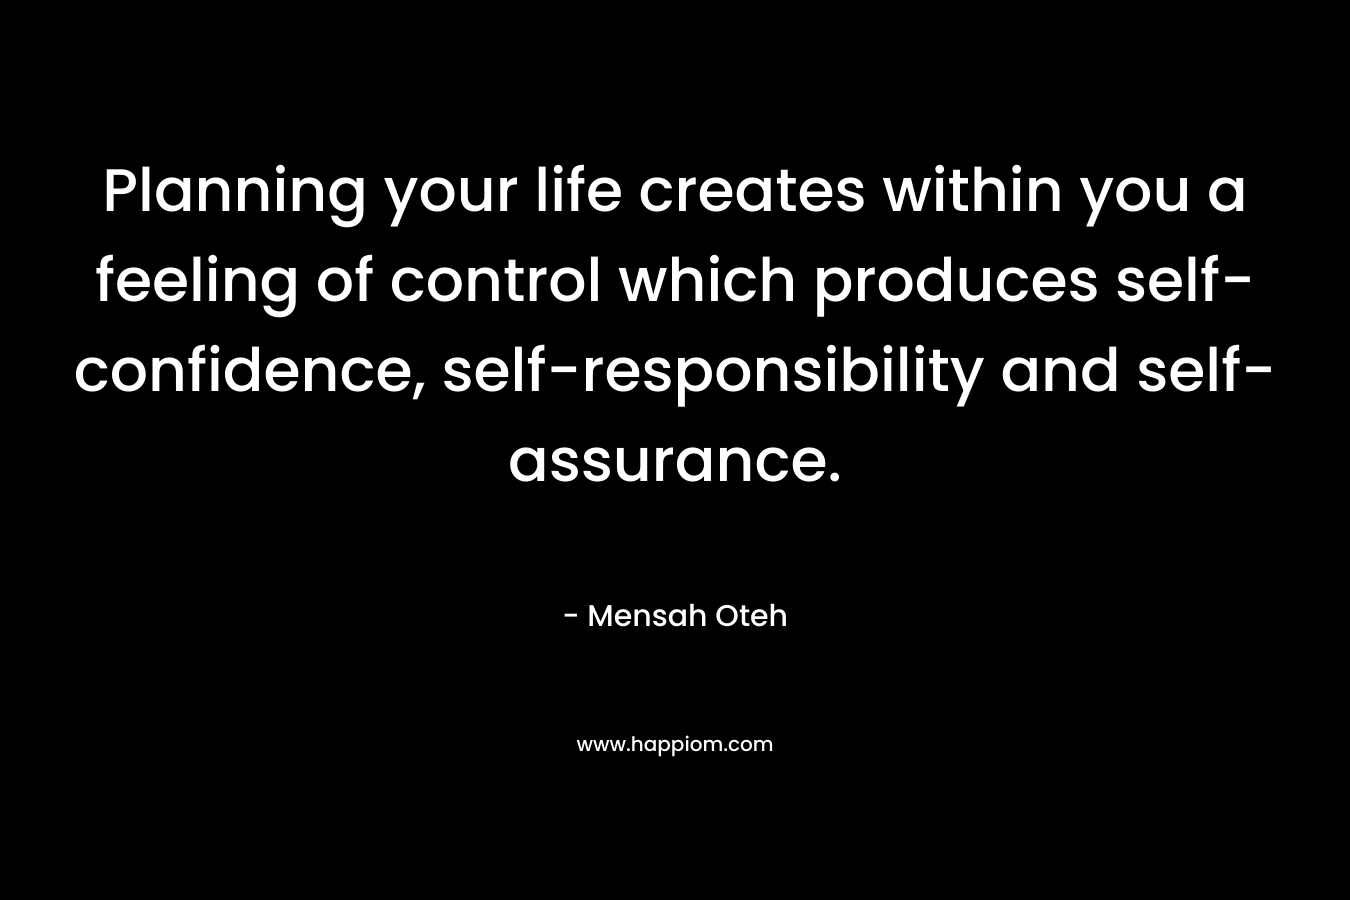 Planning your life creates within you a feeling of control which produces self-confidence, self-responsibility and self-assurance.